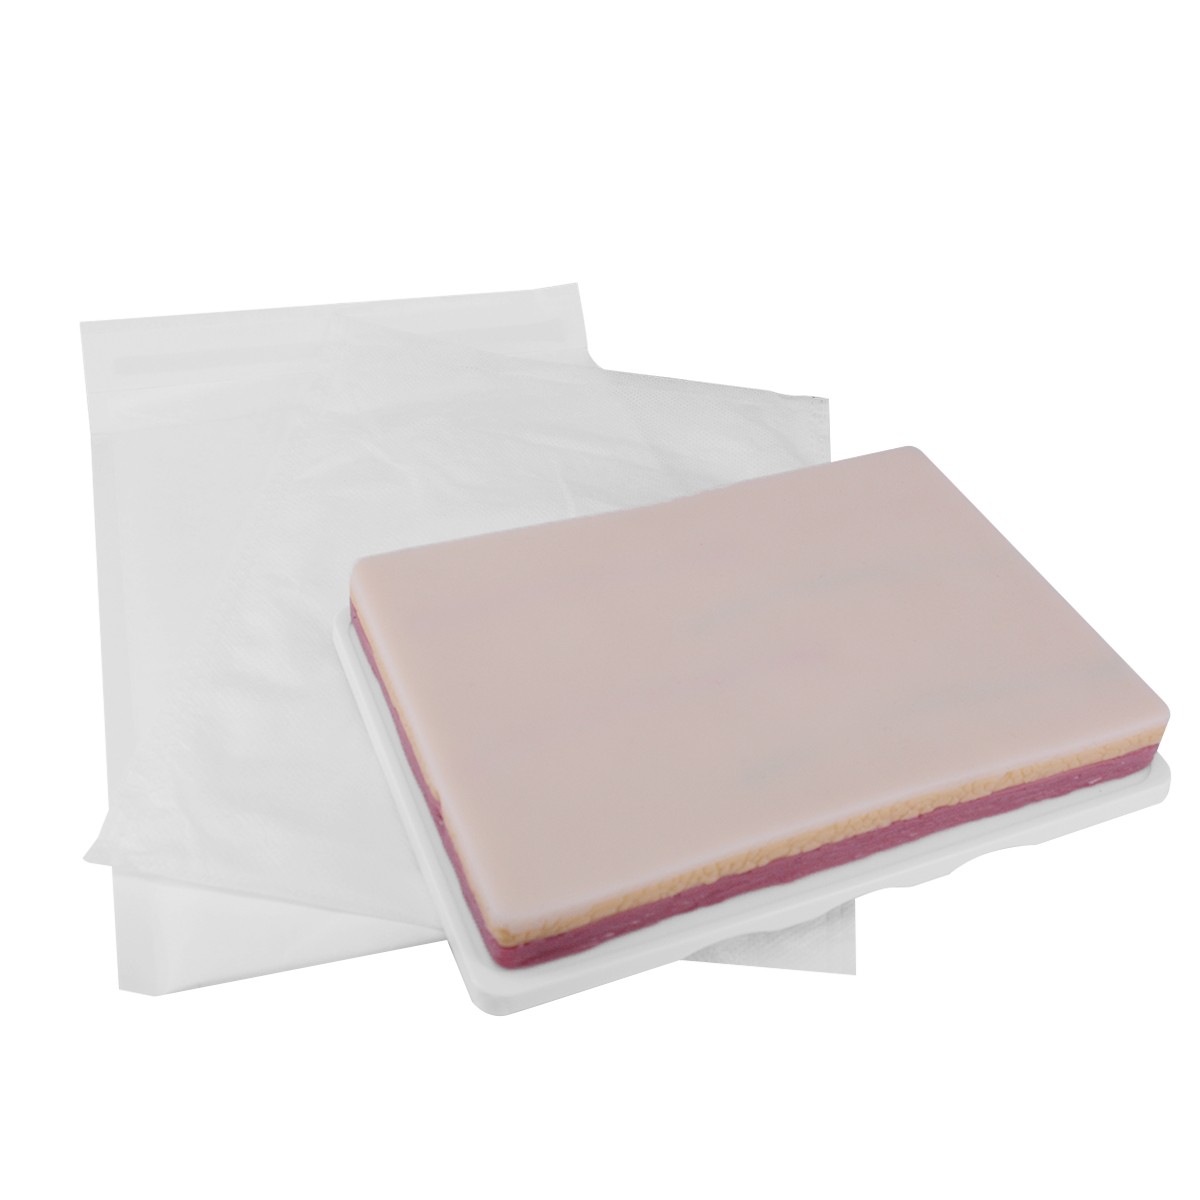 Large Venipuncture IV Injection Practice Pad with 4 Veins on Base